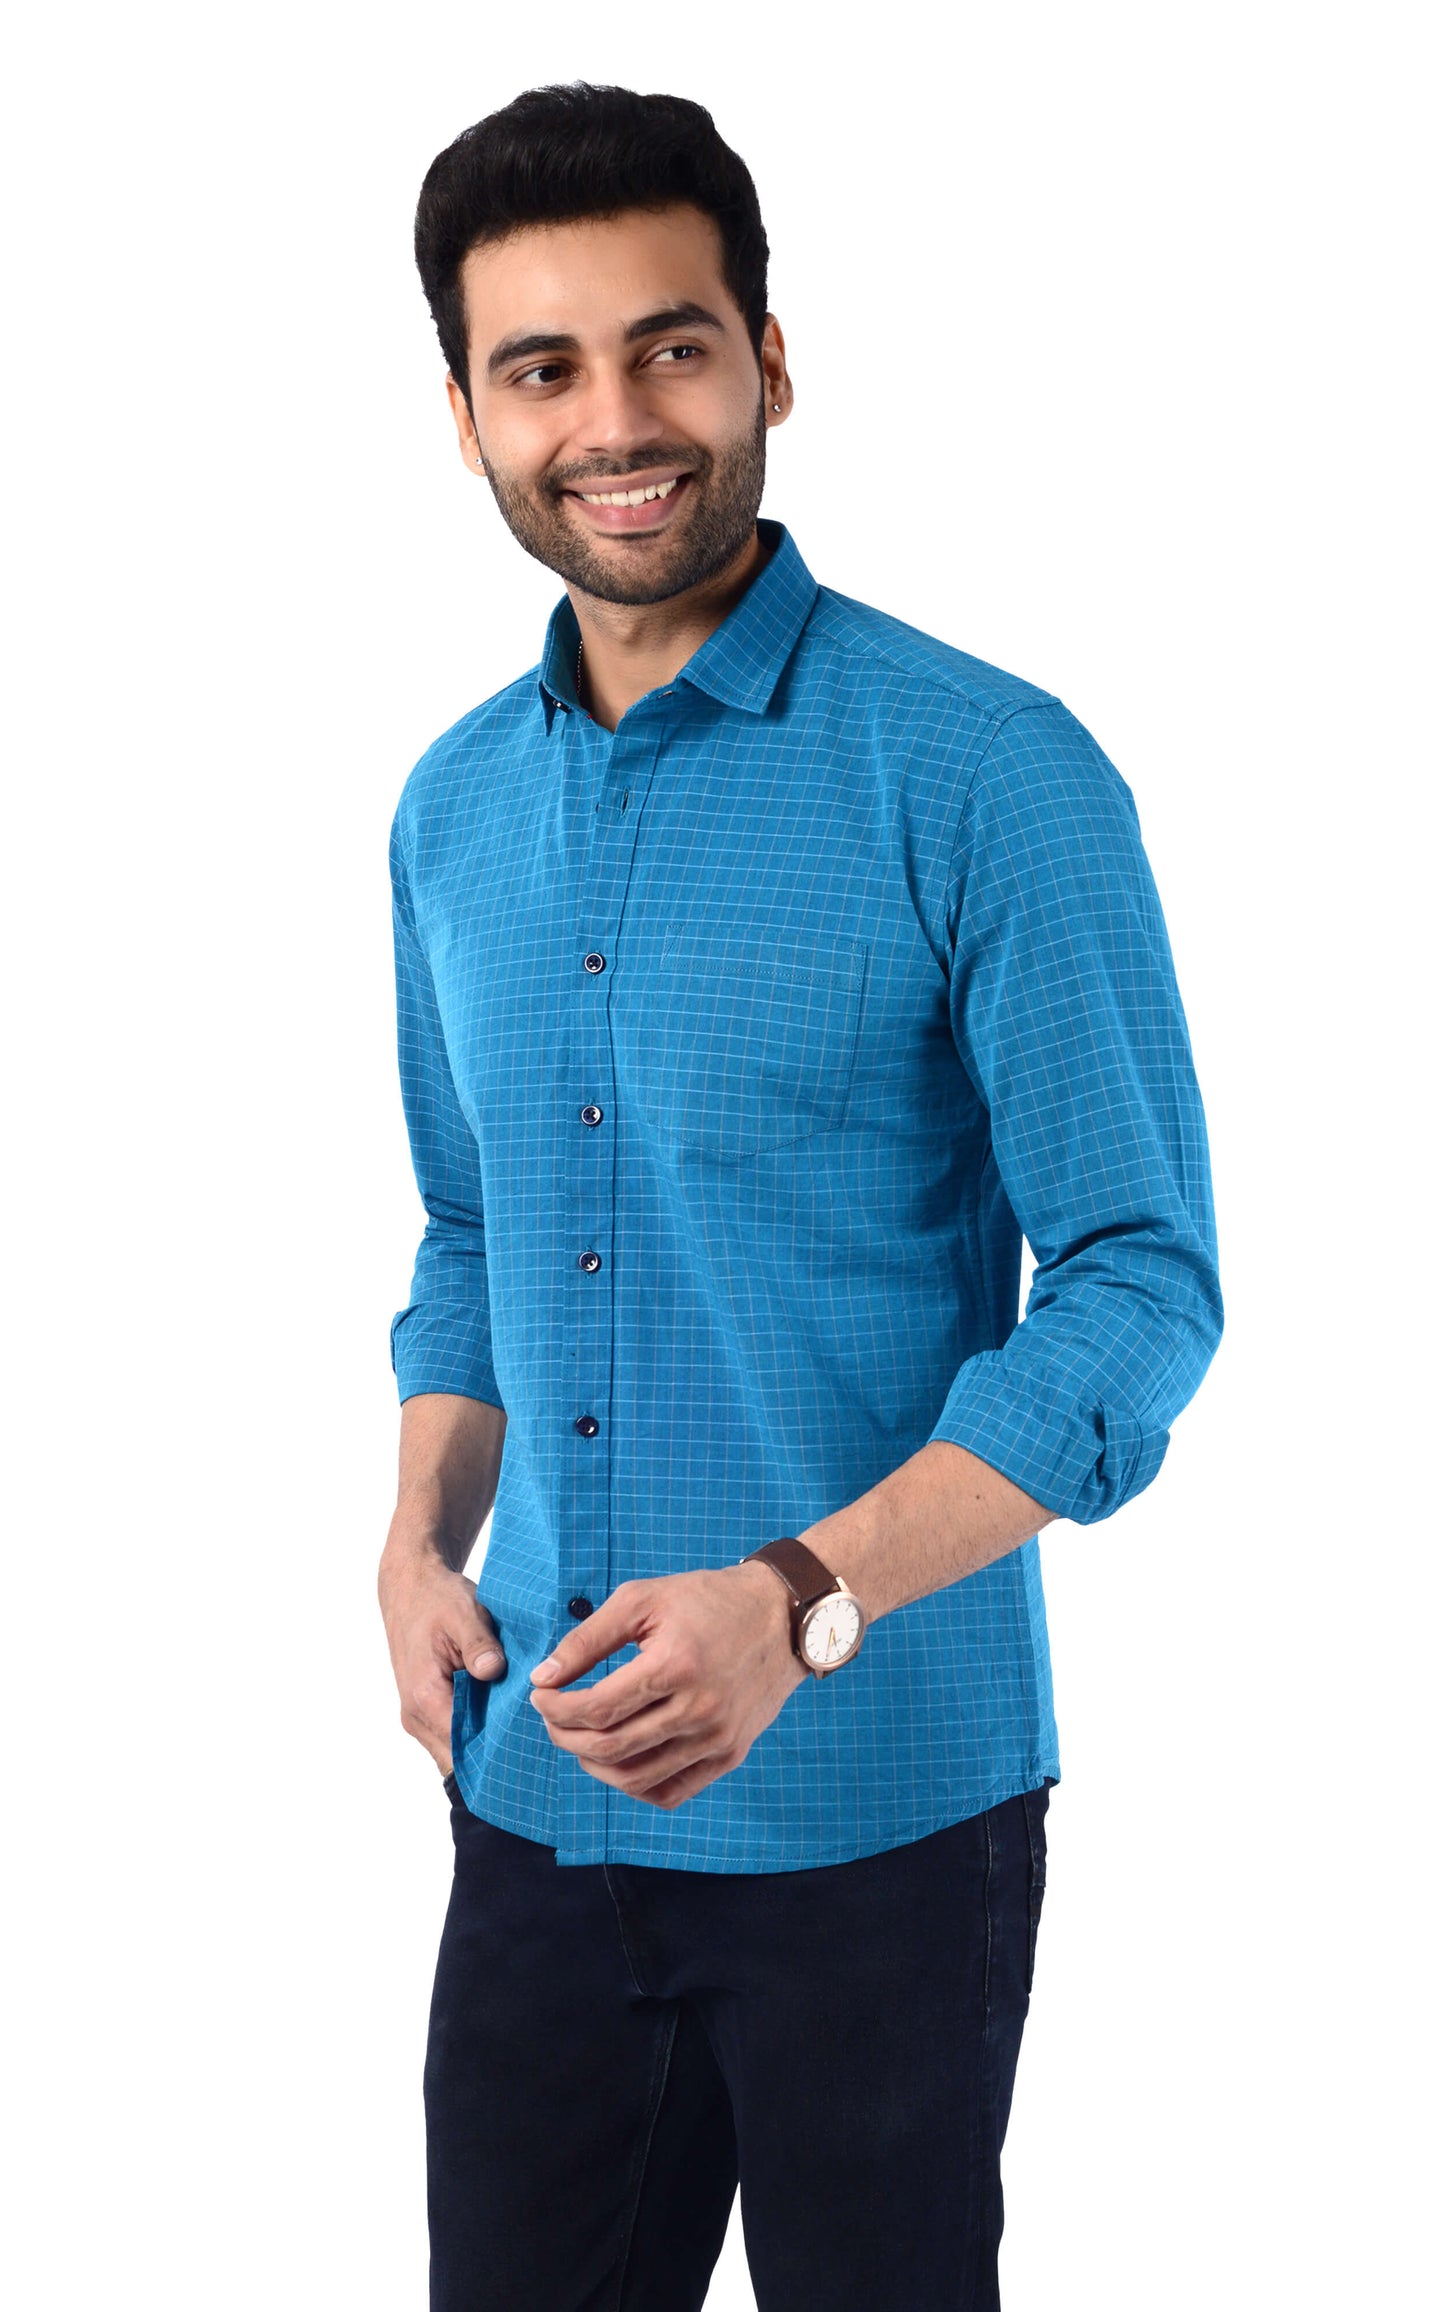 5thanfold Men's Casual Pure Cotton Full Sleeve Checkered Blue Slim Fit Shirt